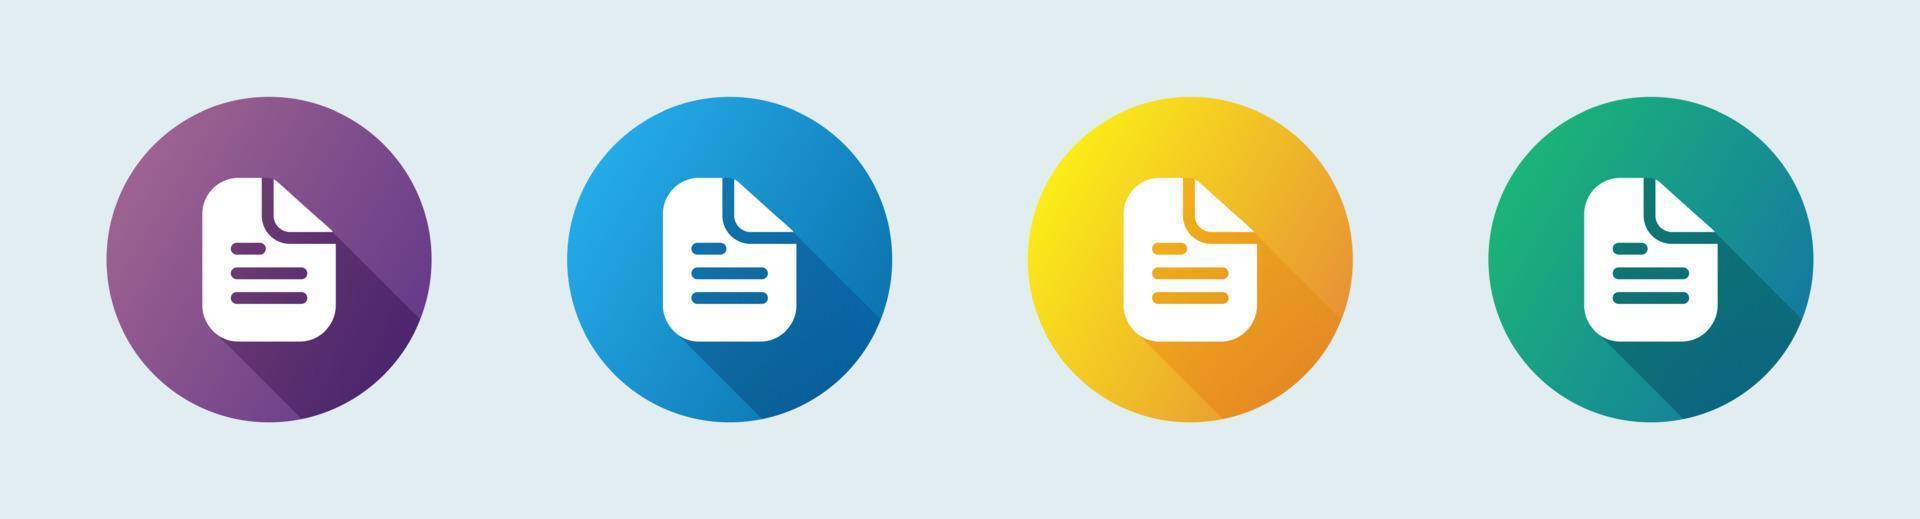 Document solid icon in flat design style. Folded written paper vector icon.